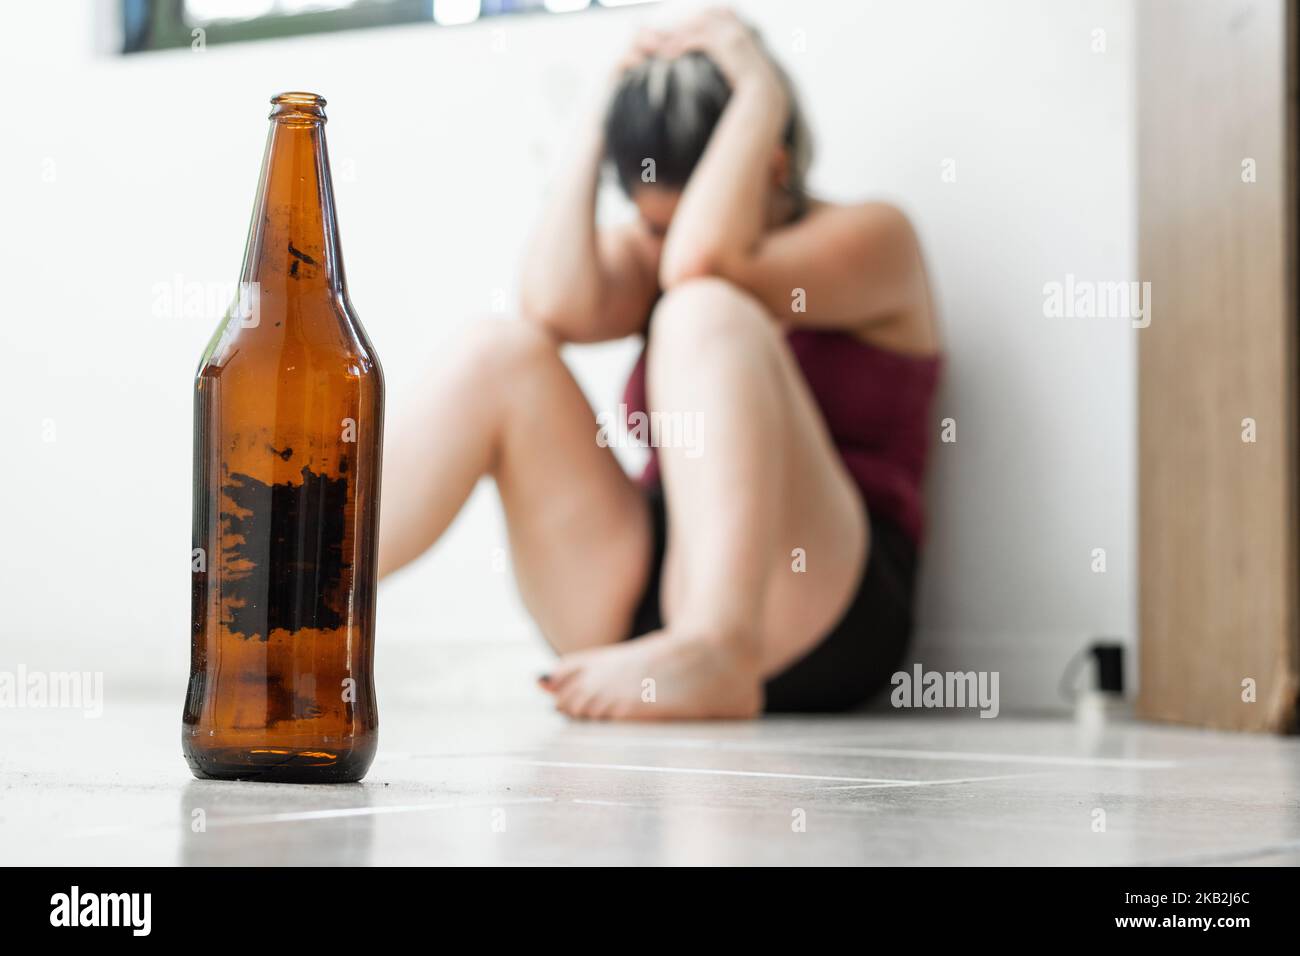 close-up of an empty beer bottle, placed on the ground, in the background a woman sitting on the ground in fetal position, crying because of domestic Stock Photo